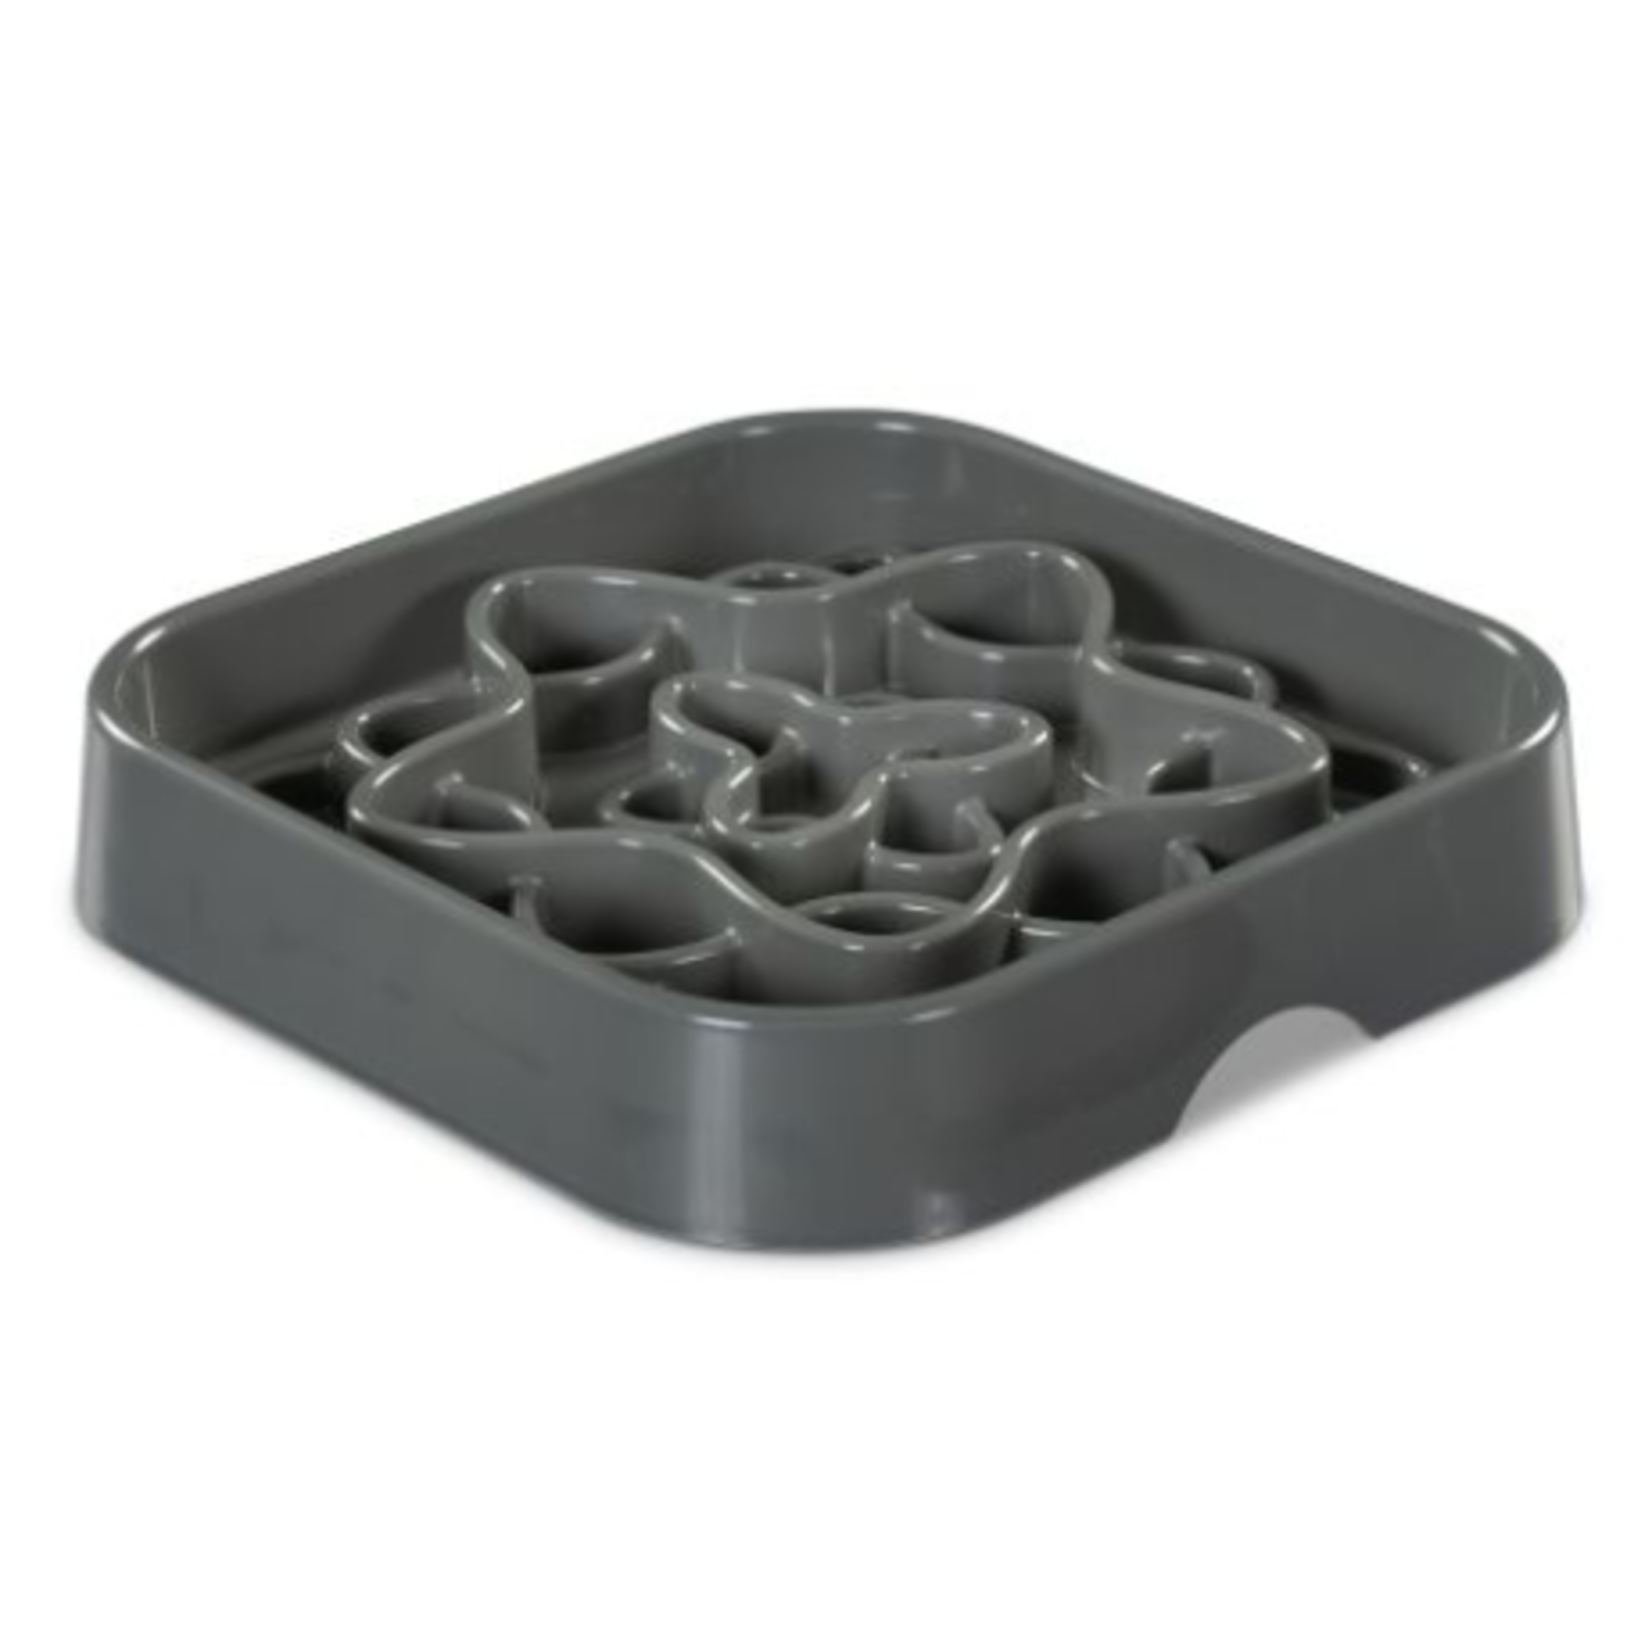 Messy Mutts Square Slow Down Bowl - 2 cups